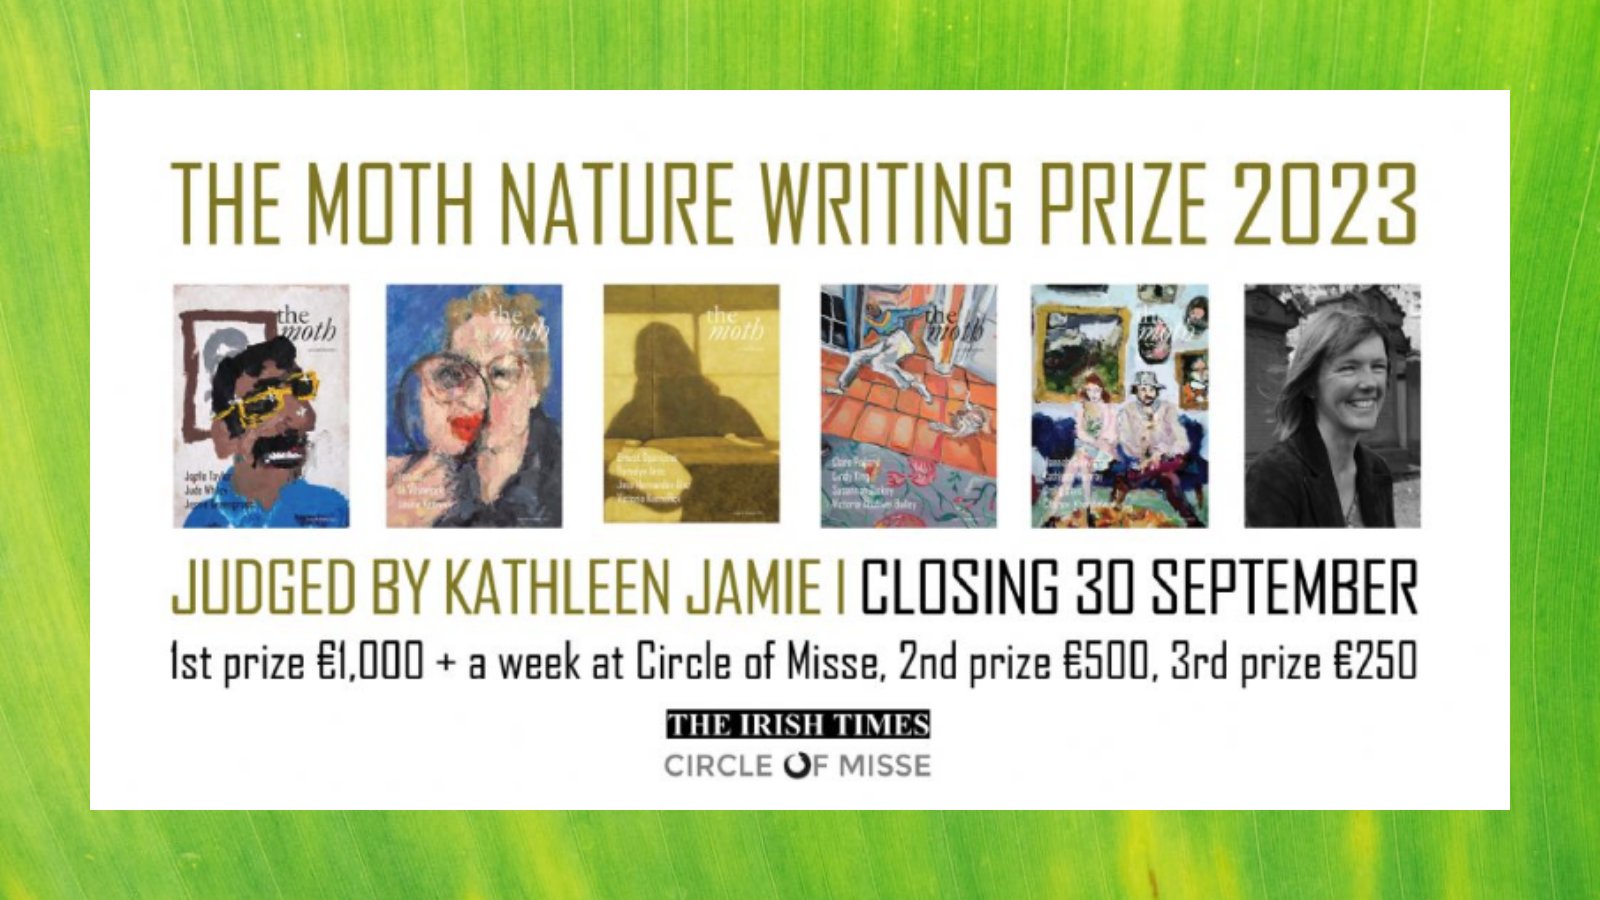 The Moth Nature Writing Prize 2023